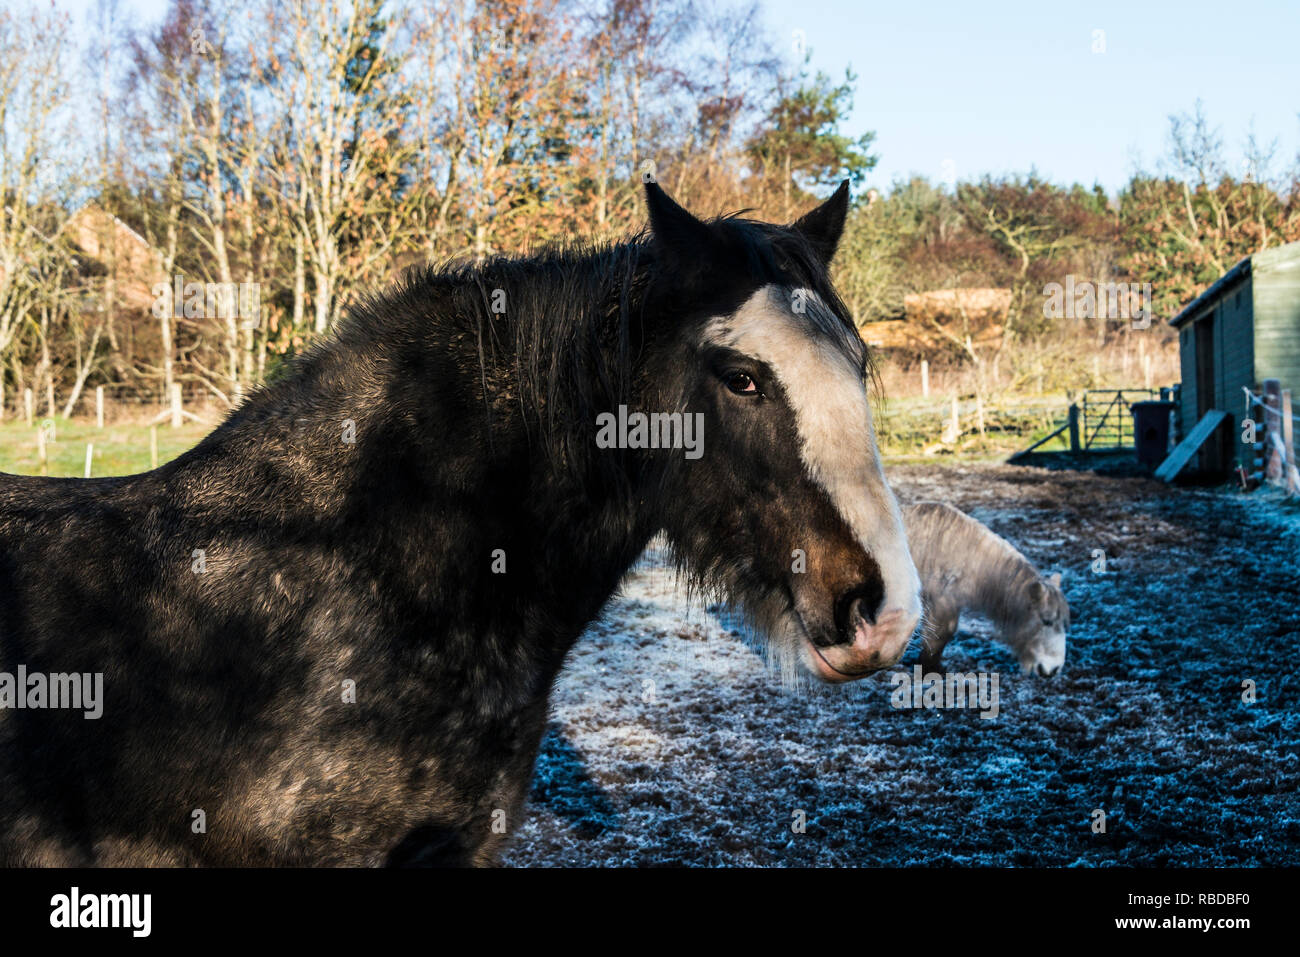 A Clydesdale horse and a Shetland pony in a frost covered field Stock Photo